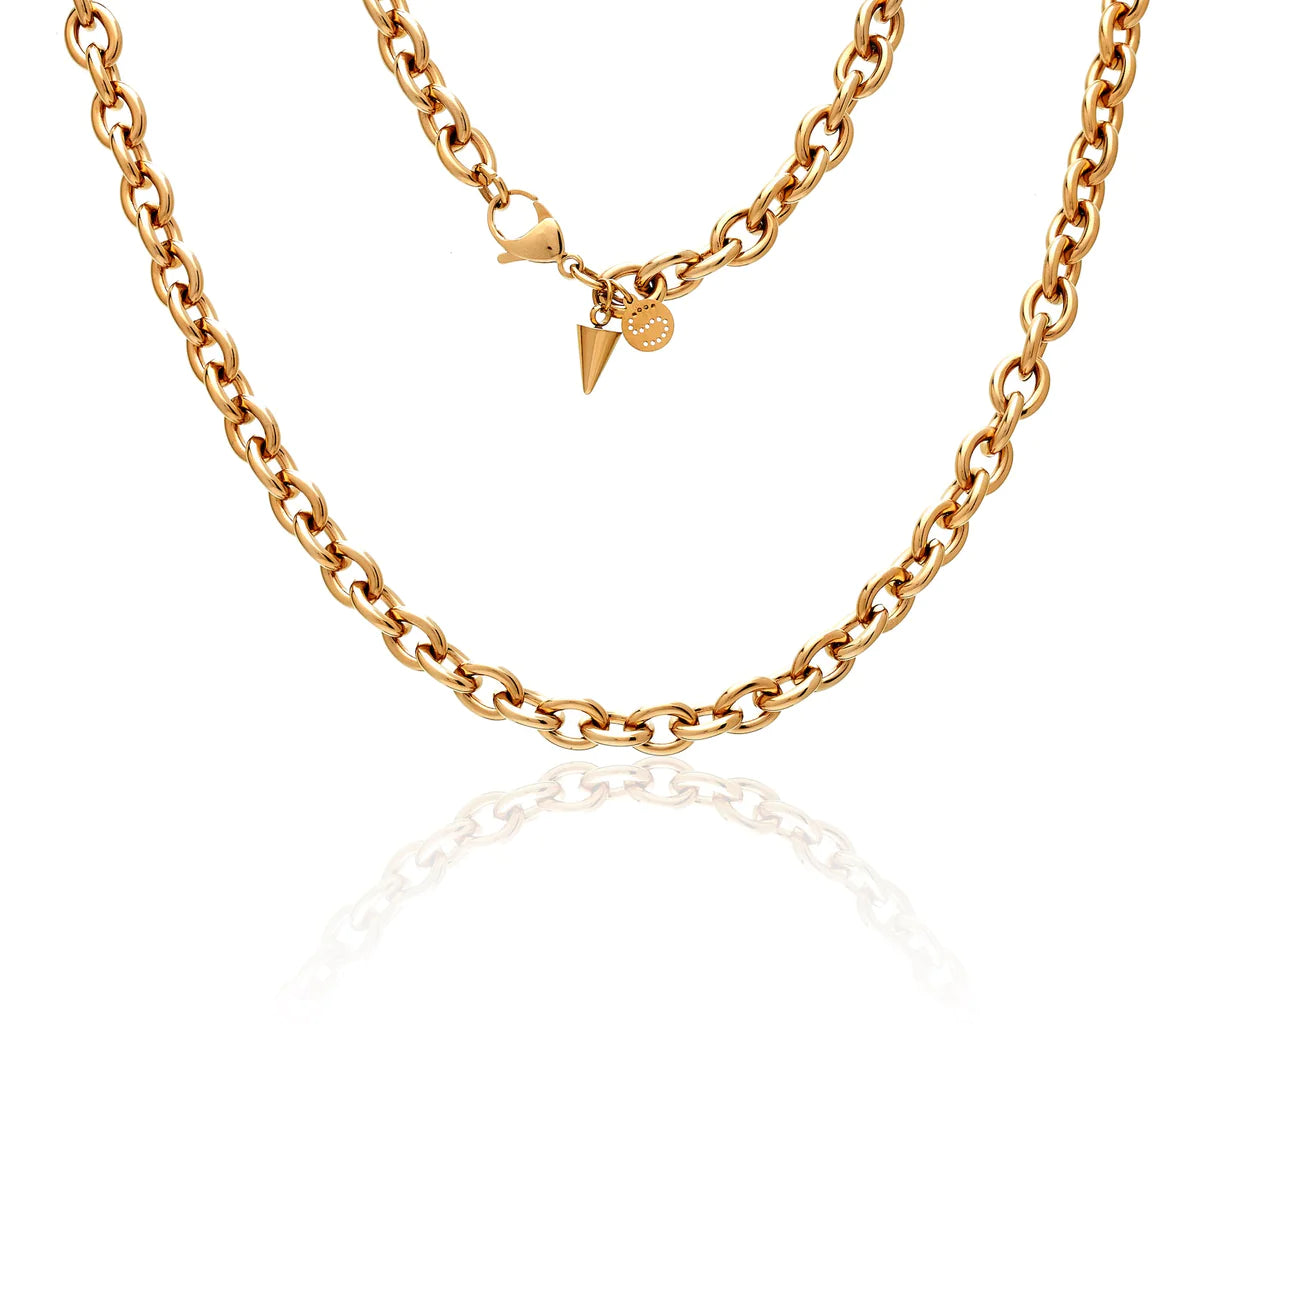 Men's Edit / Hudson / Necklace / Gold Plated Stainless Steel